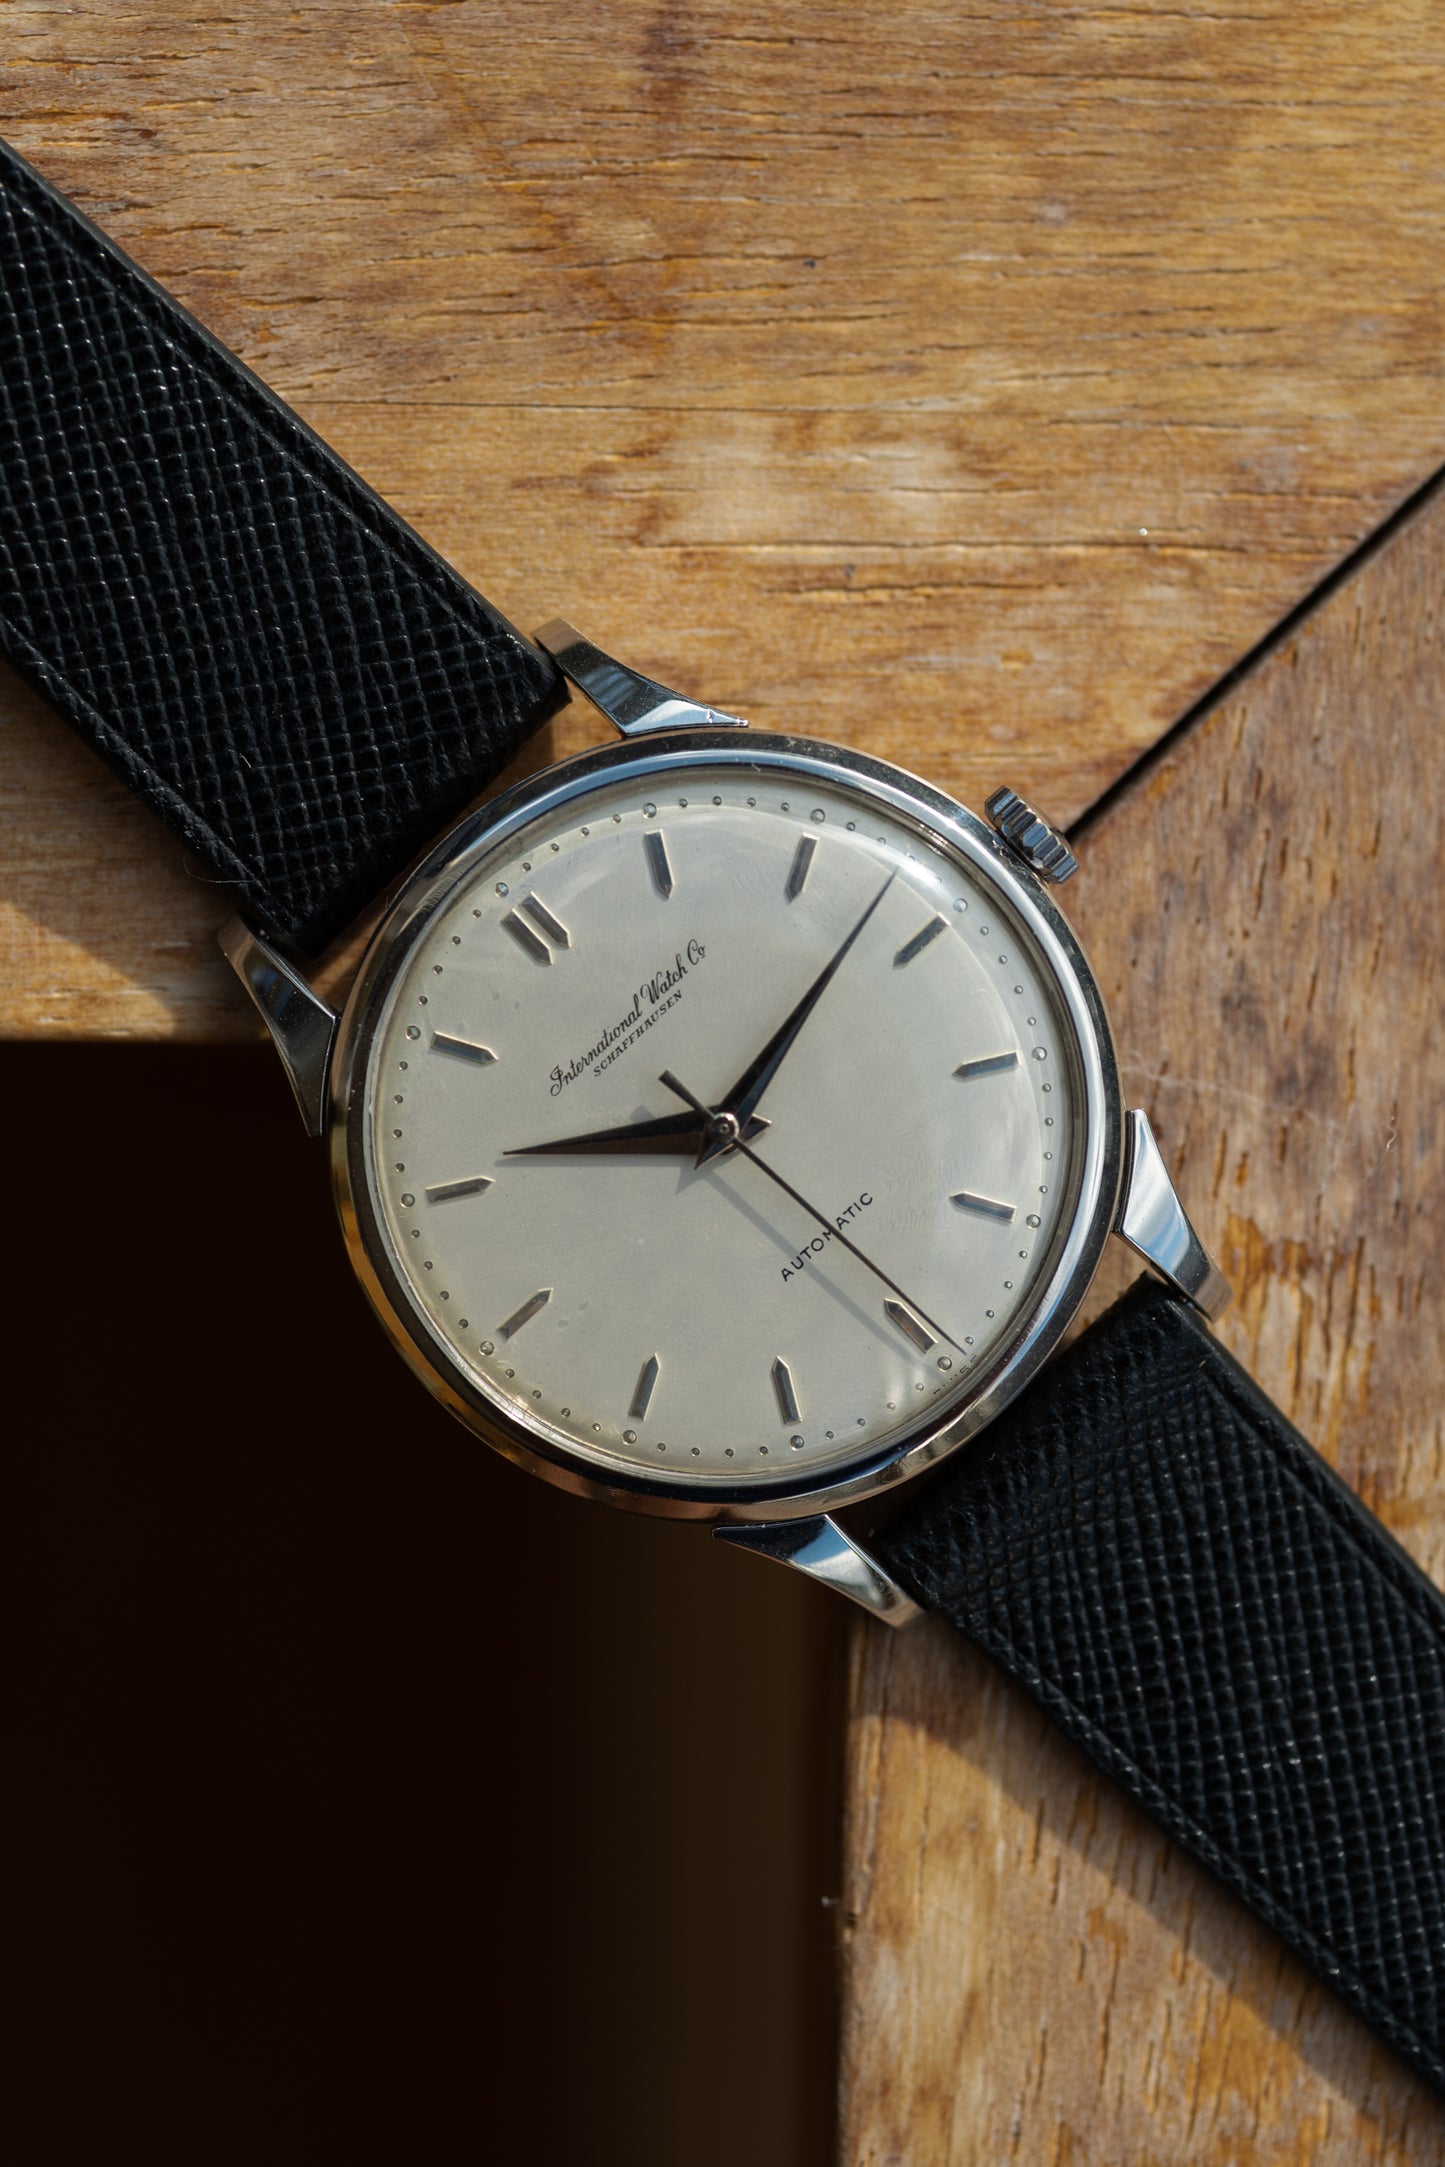 IWC dress watch in Platinum, cal. 853 from early 1960's